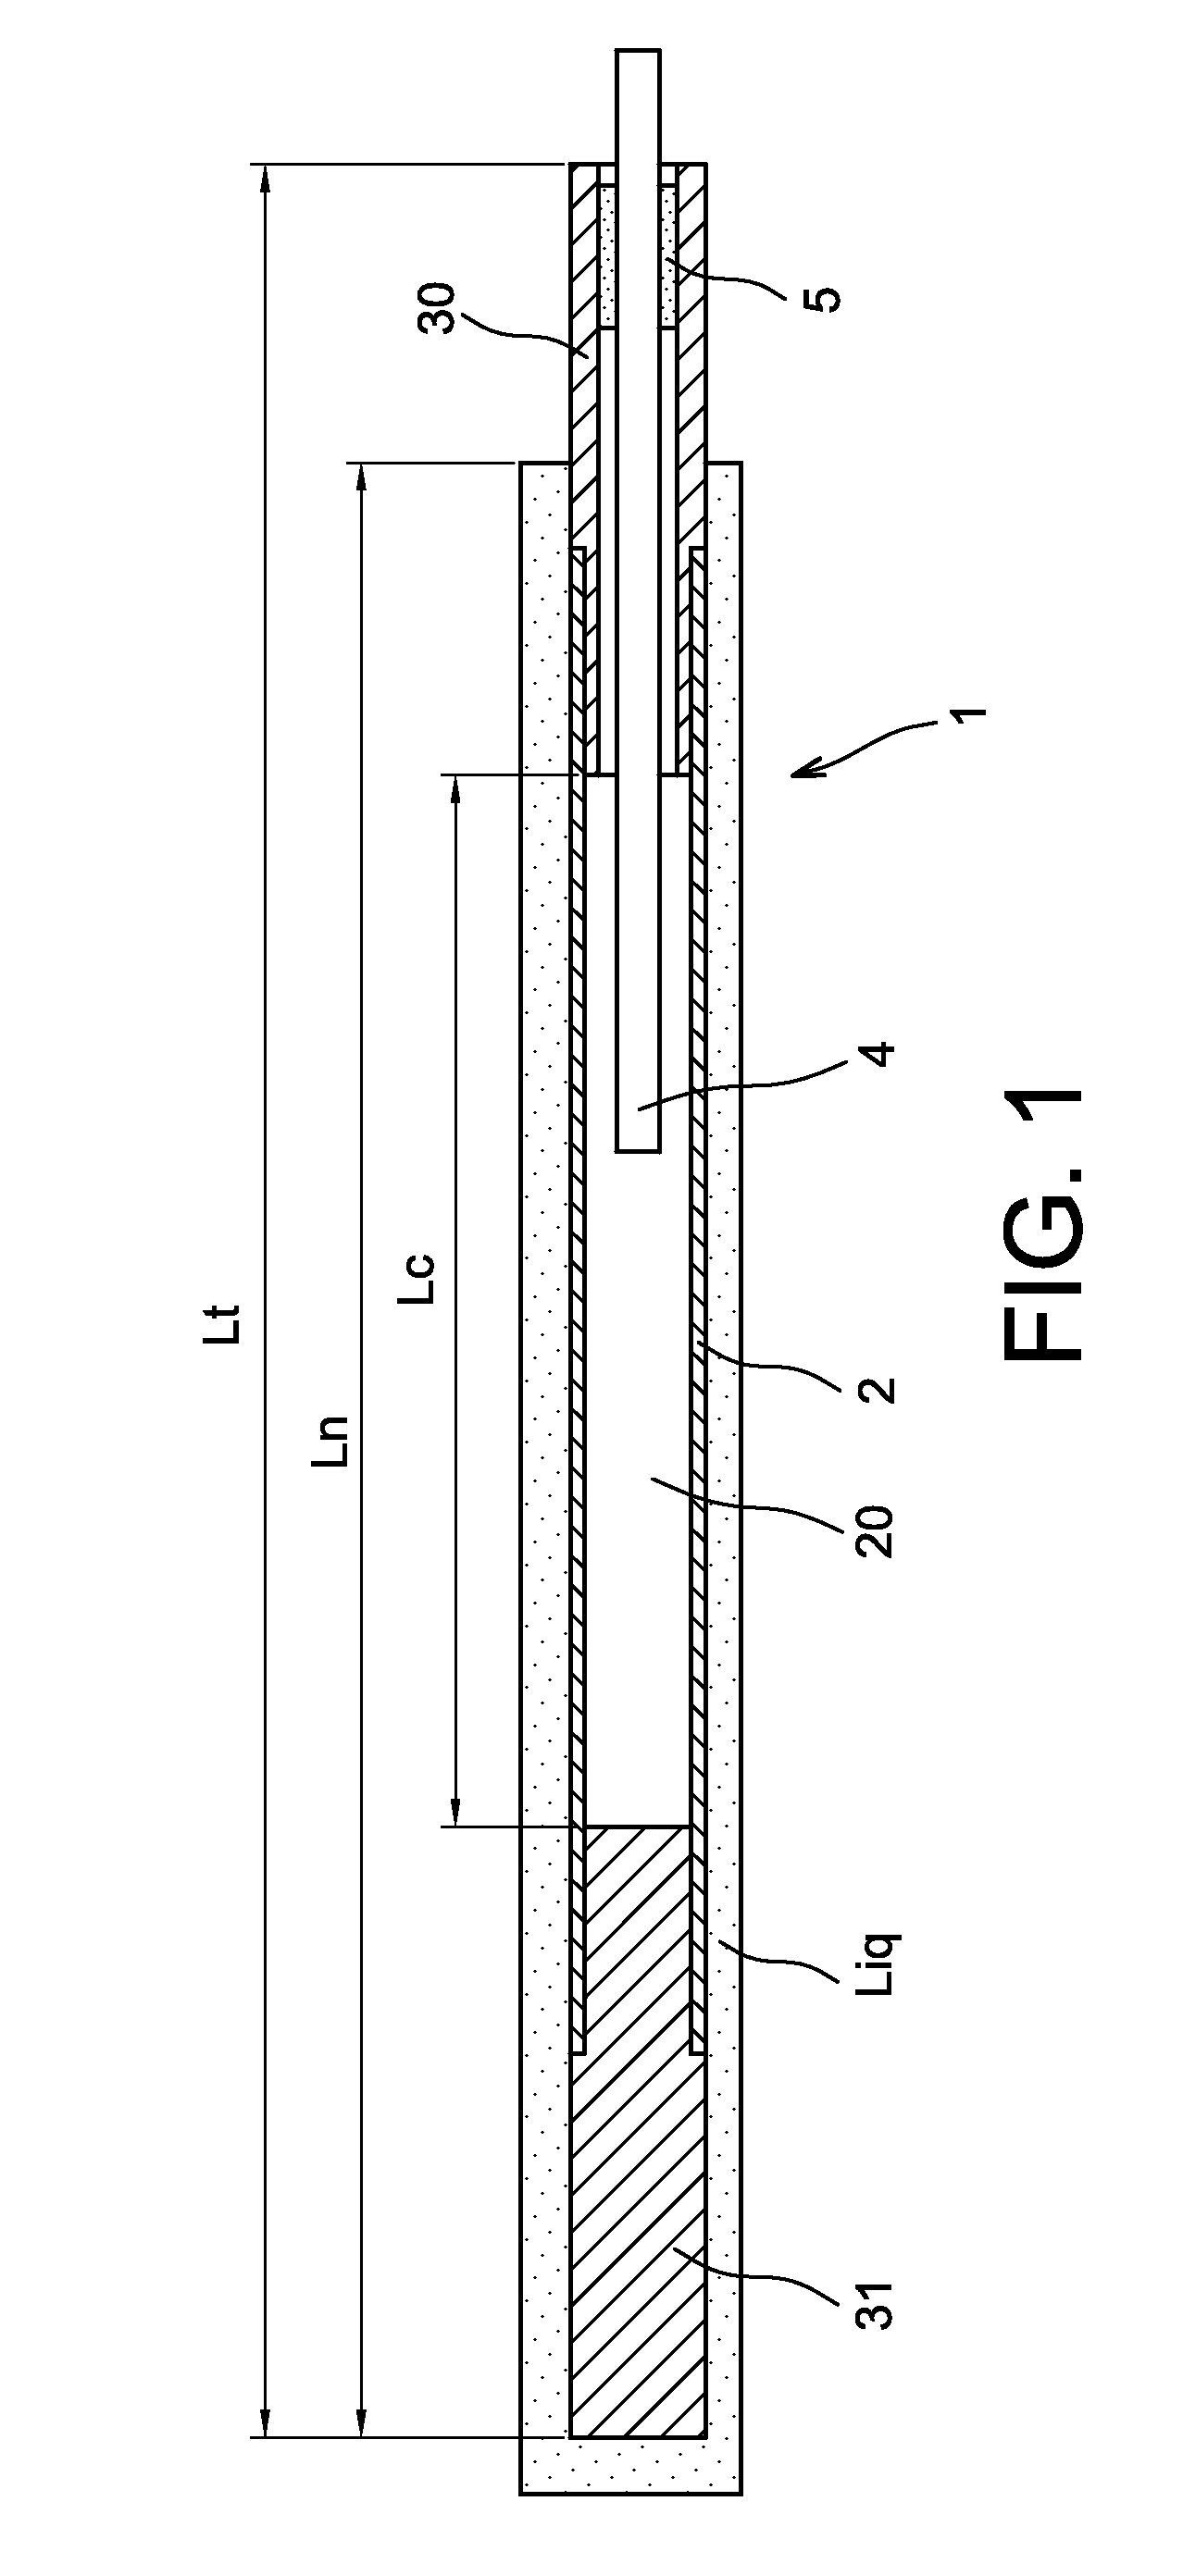 Electrical Heating Device For Heating A Liquid, Method For Producing Same, And Use In The Electrical Simulation Of Nuclear Fuel Rods